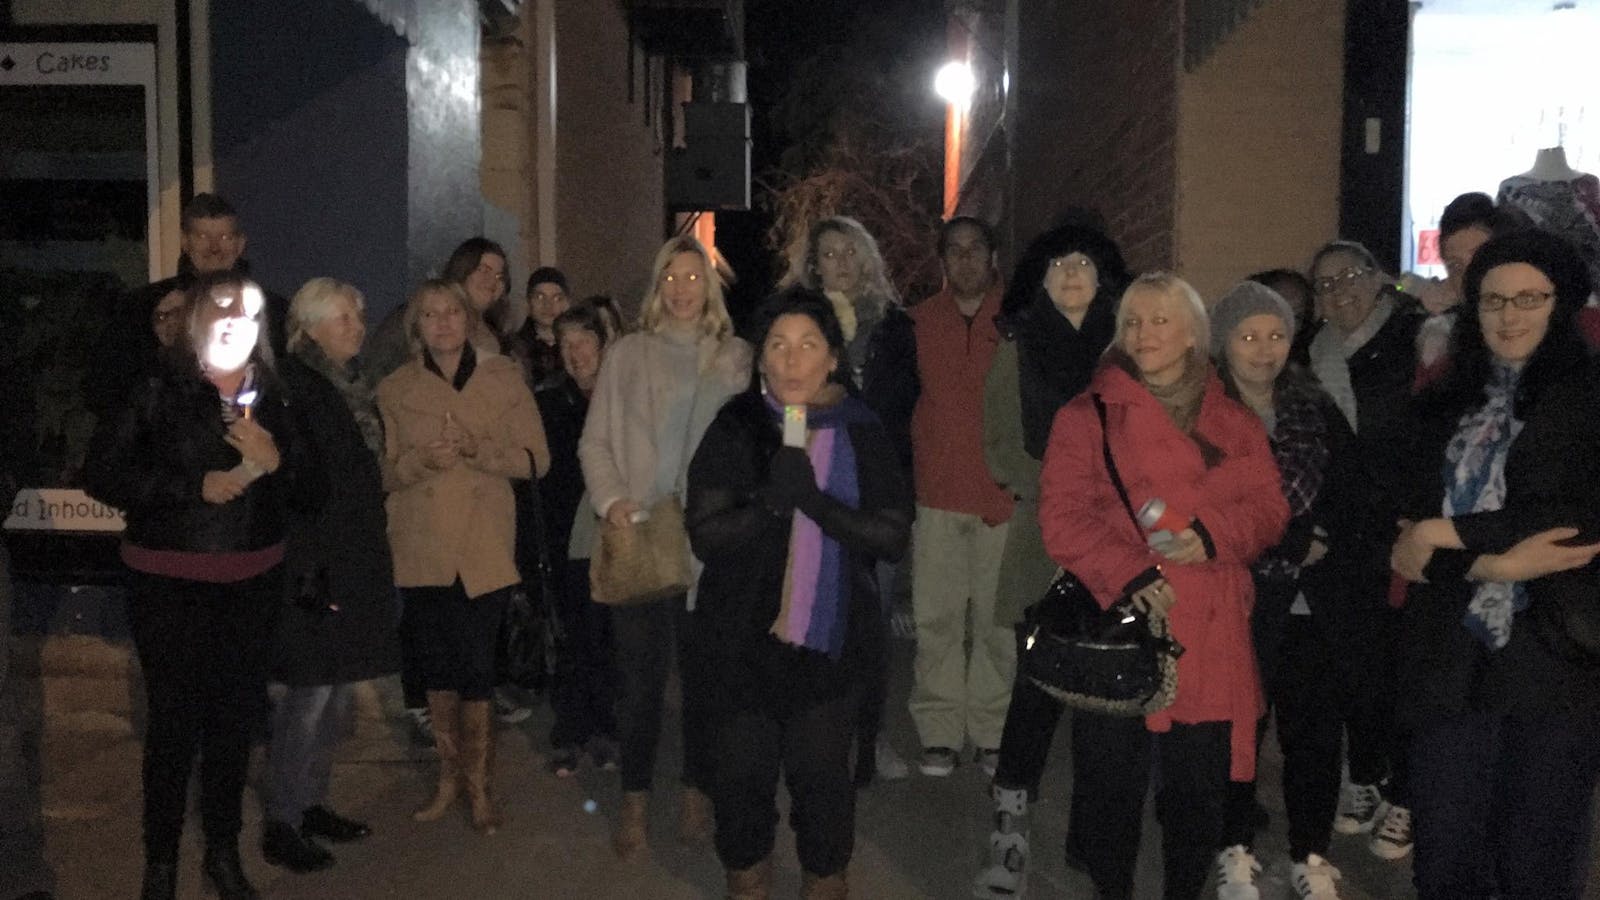 Hunter Valley Ghost Tours - Group